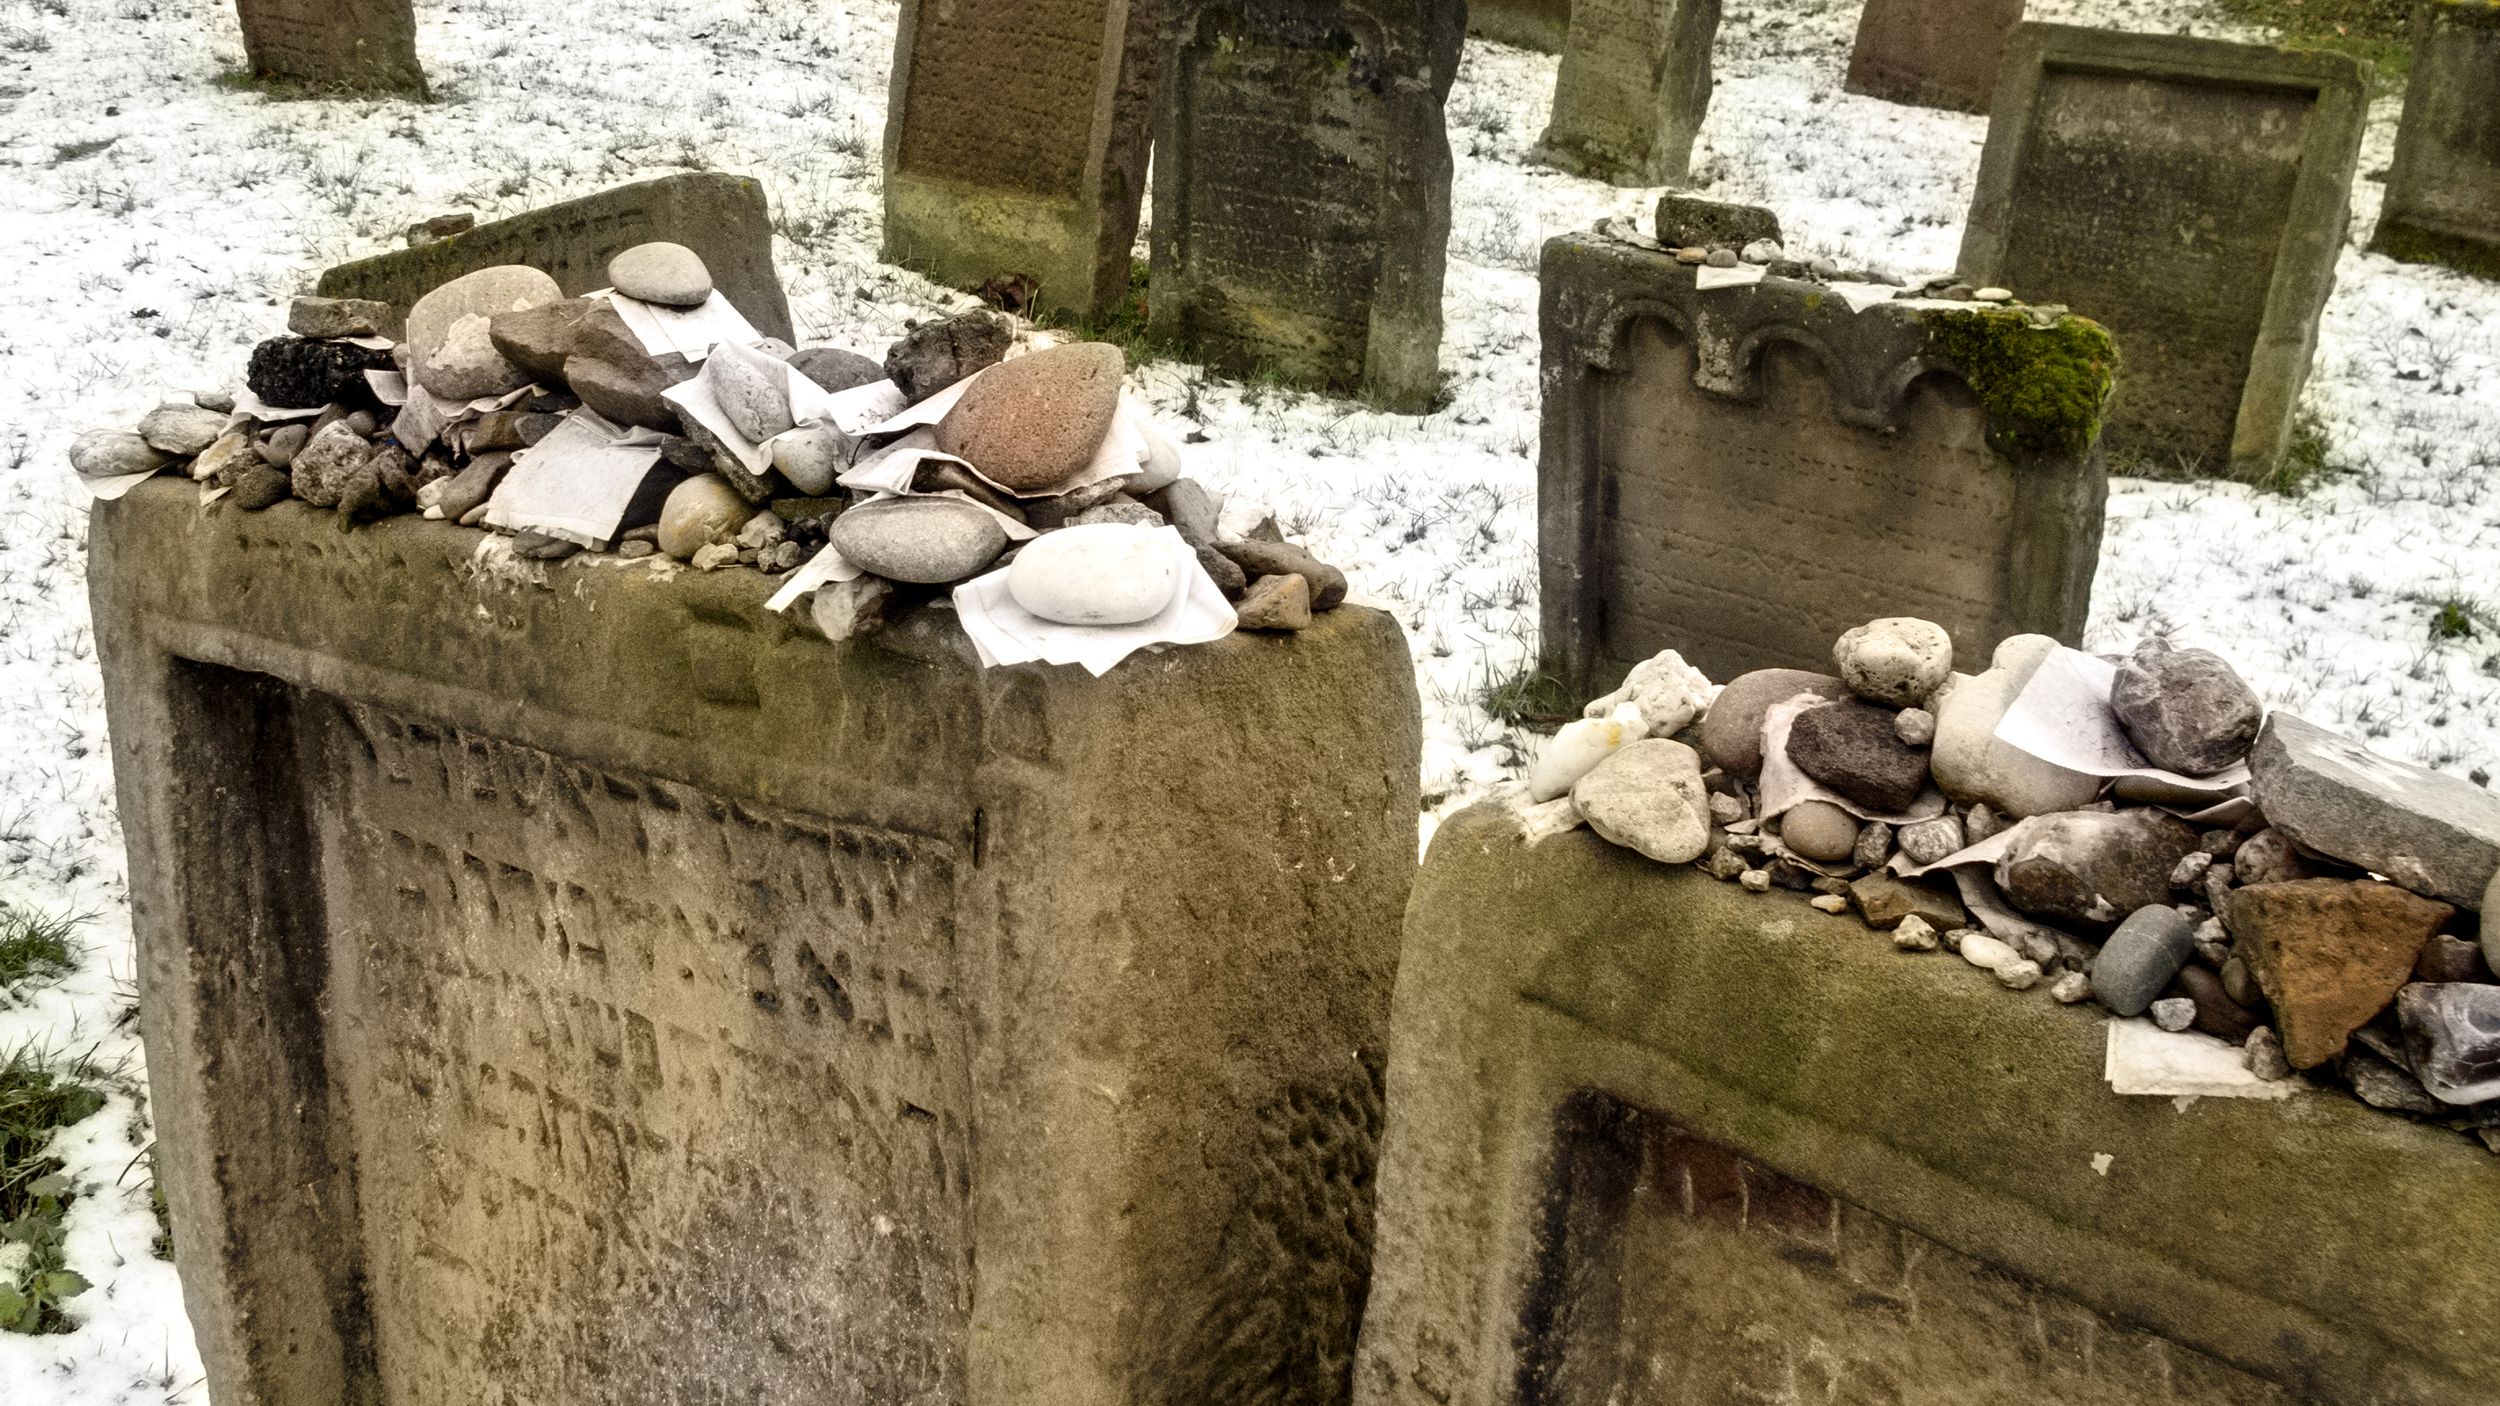 Two Gravestones with Rocks Placed Atop